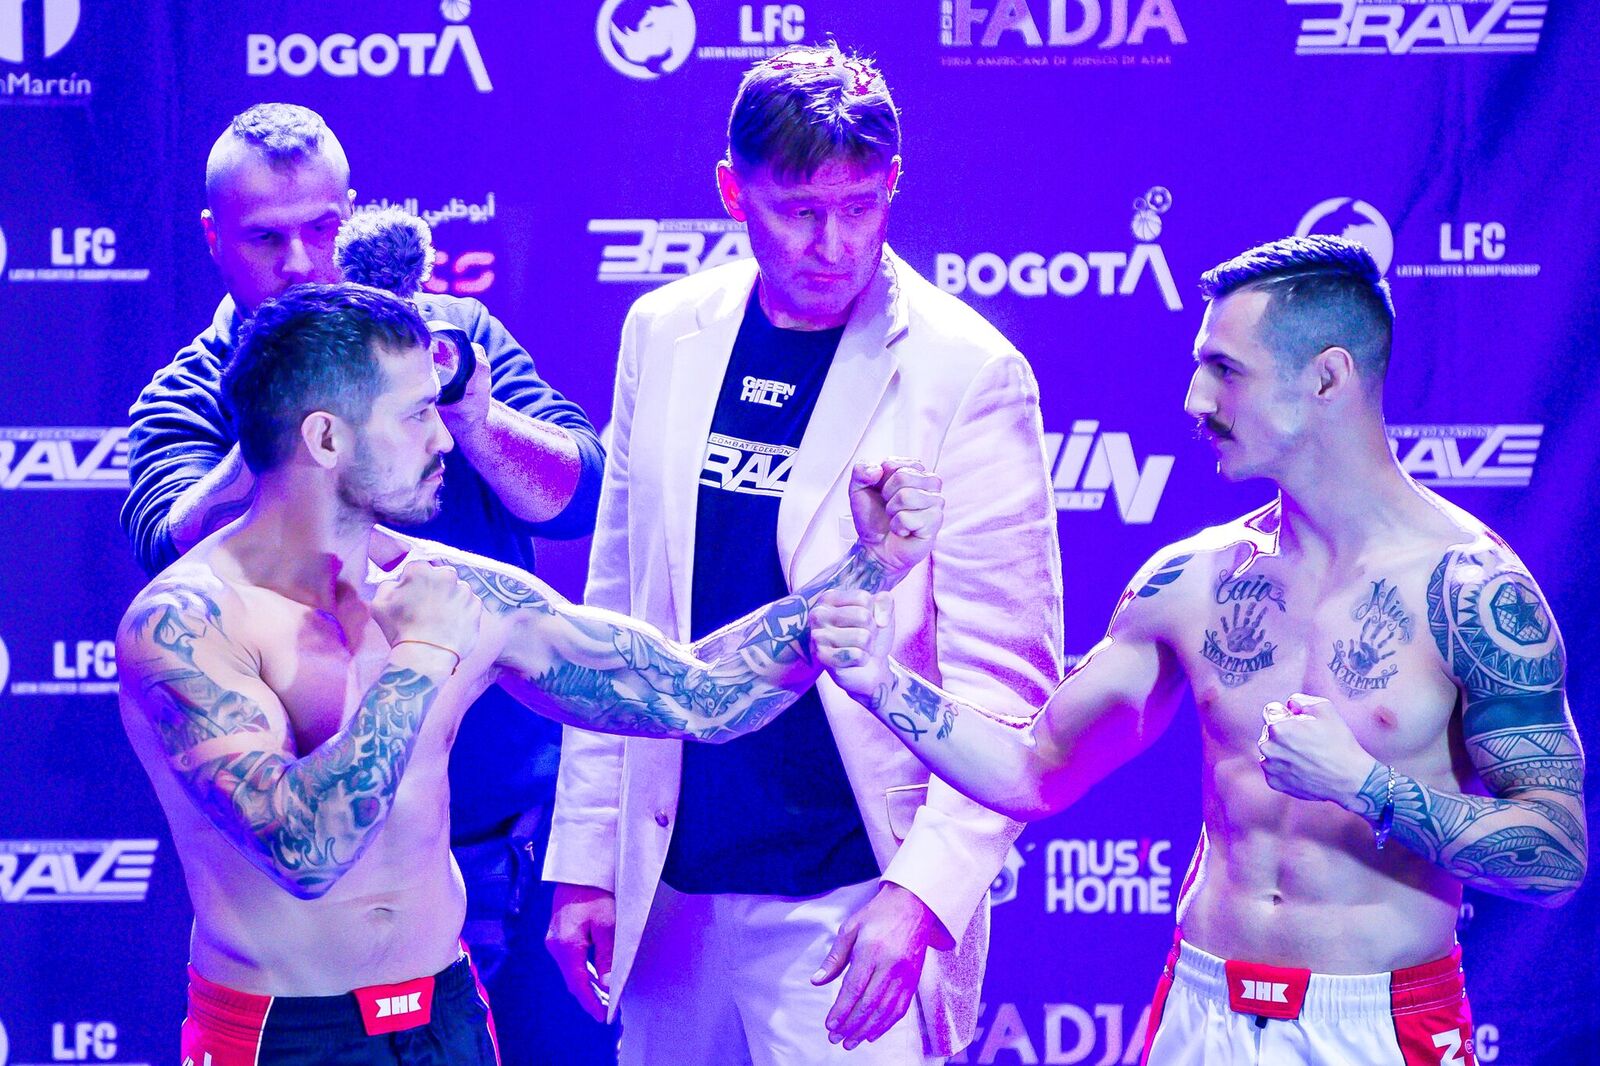 BRAVE 26 fighters light up Colombian crowd at ceremonial weigh-ins -